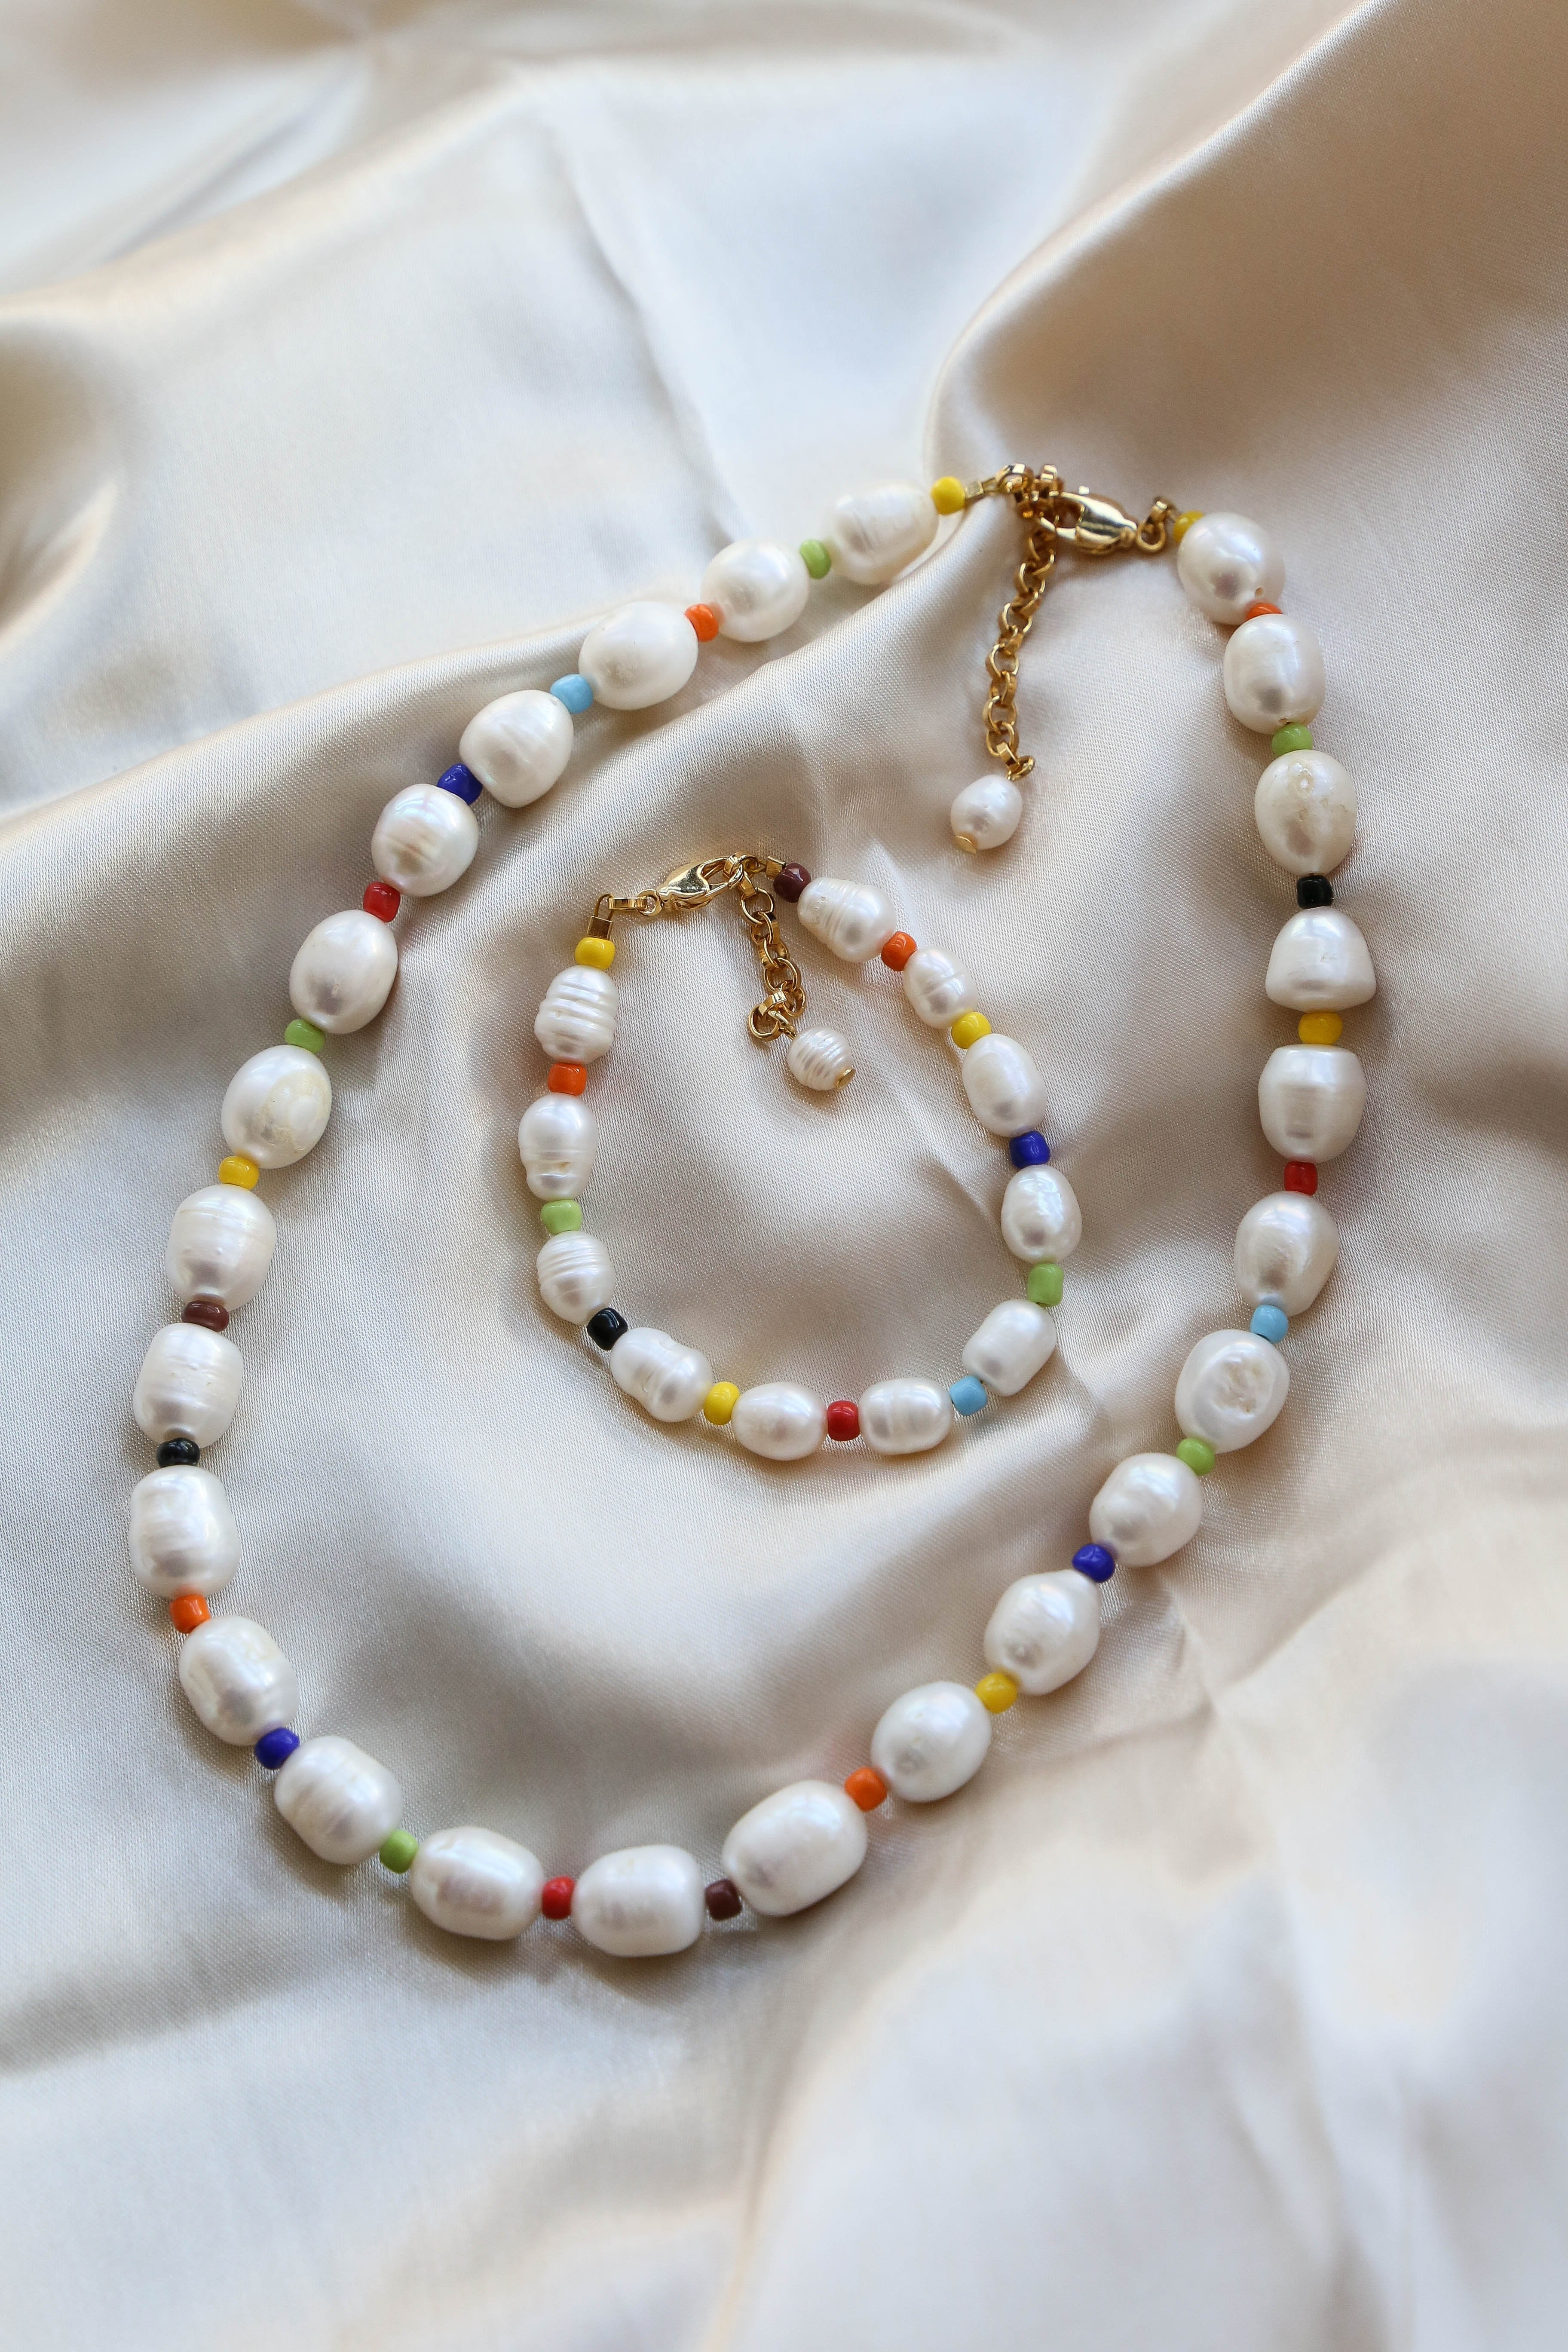 Cecile Pearl Necklace - Boutique Minimaliste has waterproof, durable, elegant and vintage inspired jewelry